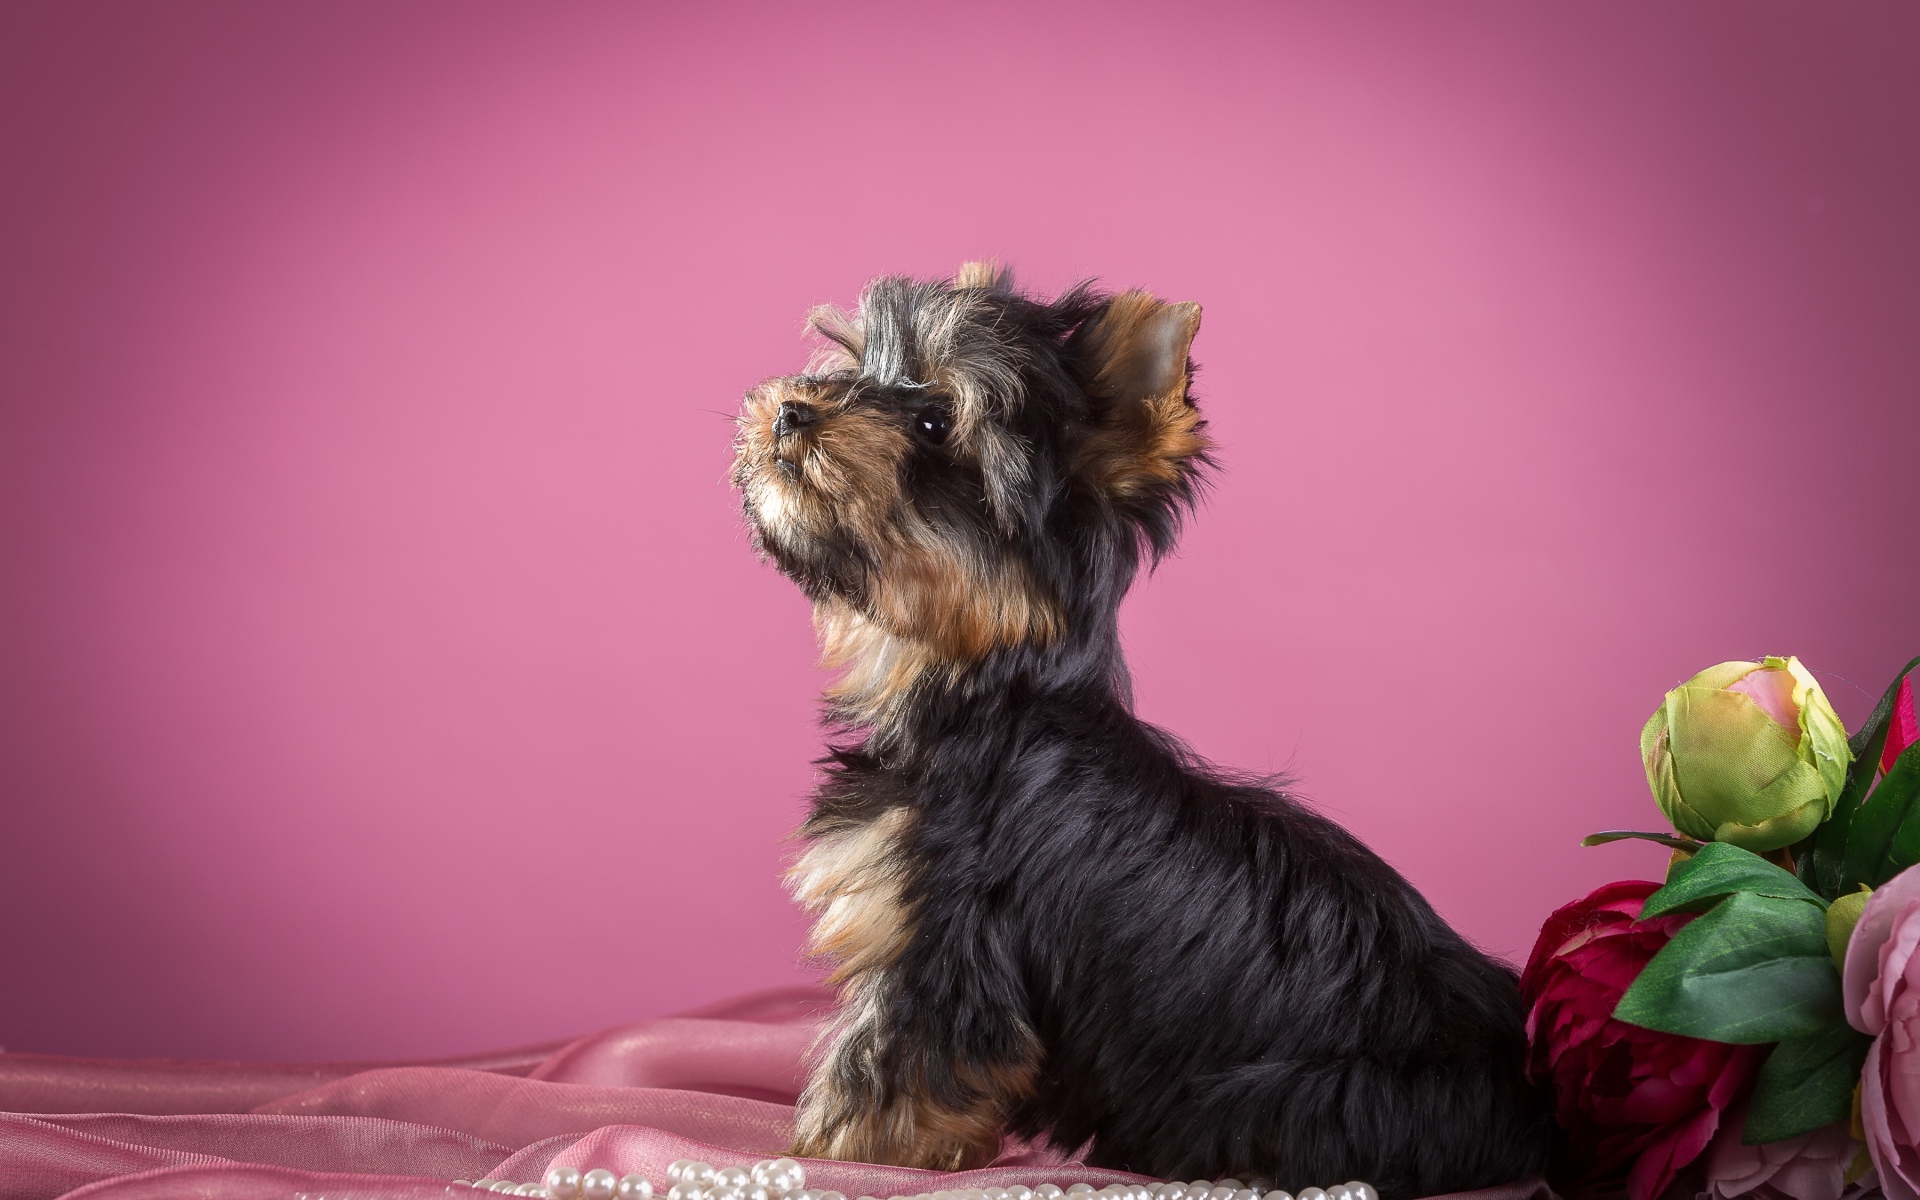 Yorkshire terrier sitting on a pink background with flowers and beads.